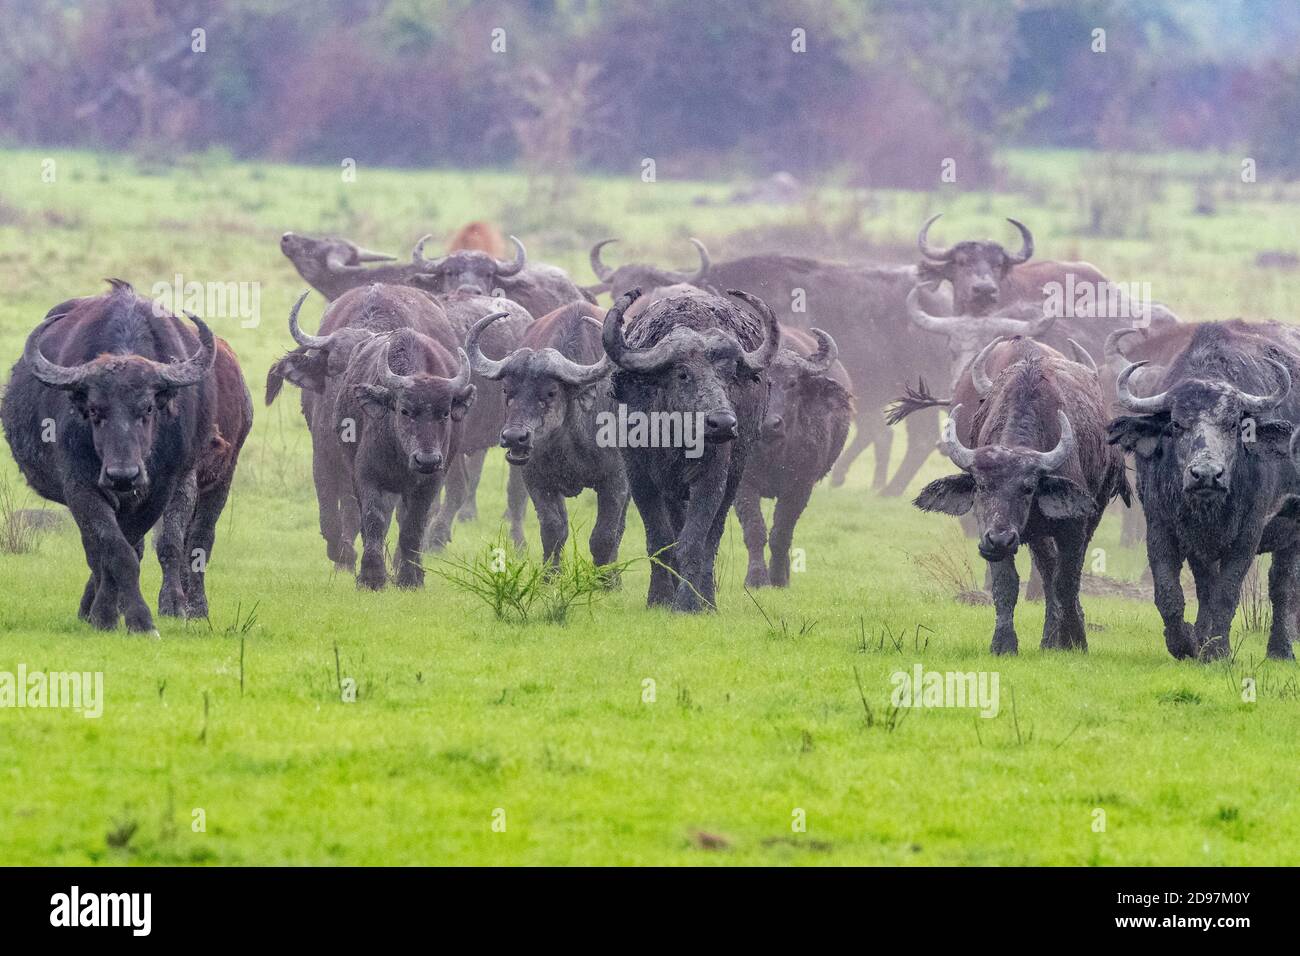 Cape buffalo (Syncerus caffer) gather during the rainy season to graze the lush grasslands at Ishasha in the southwest sector of the Queen Elizabeth N Stock Photo